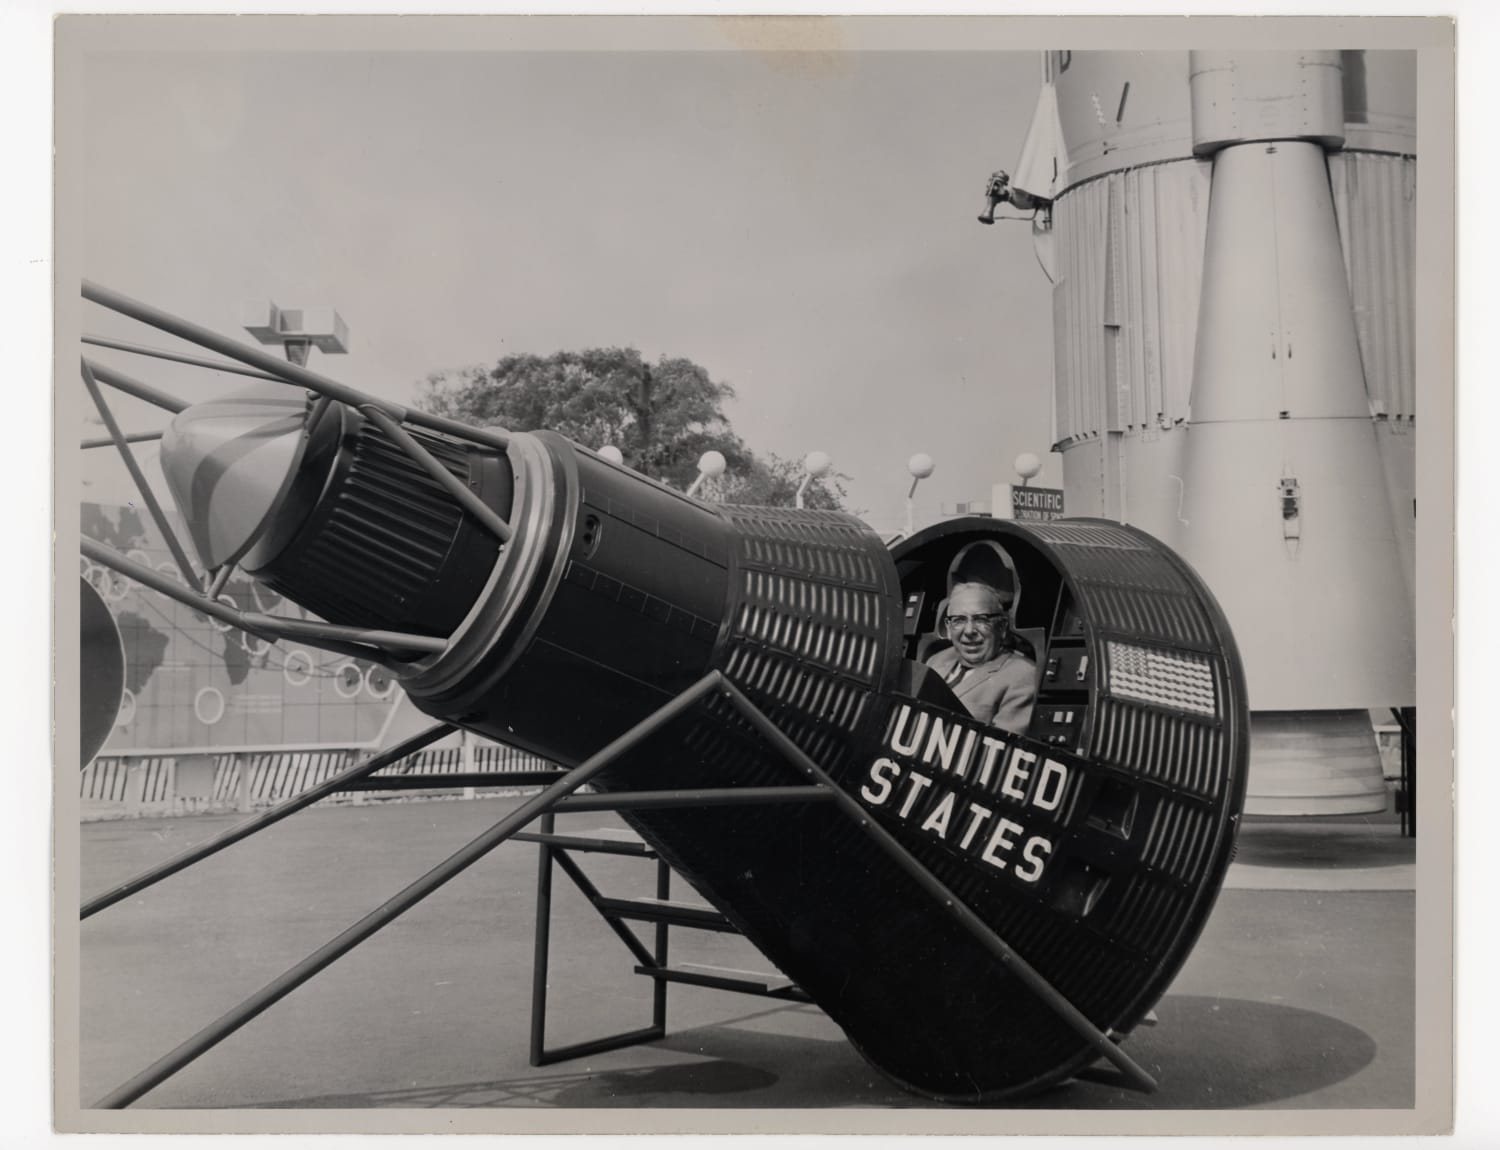 My great grandfather sitting in the Gemini spacecraft capsule at the 1964 World's Fair in Queens, NY. Visiting from Hannover, Germany.